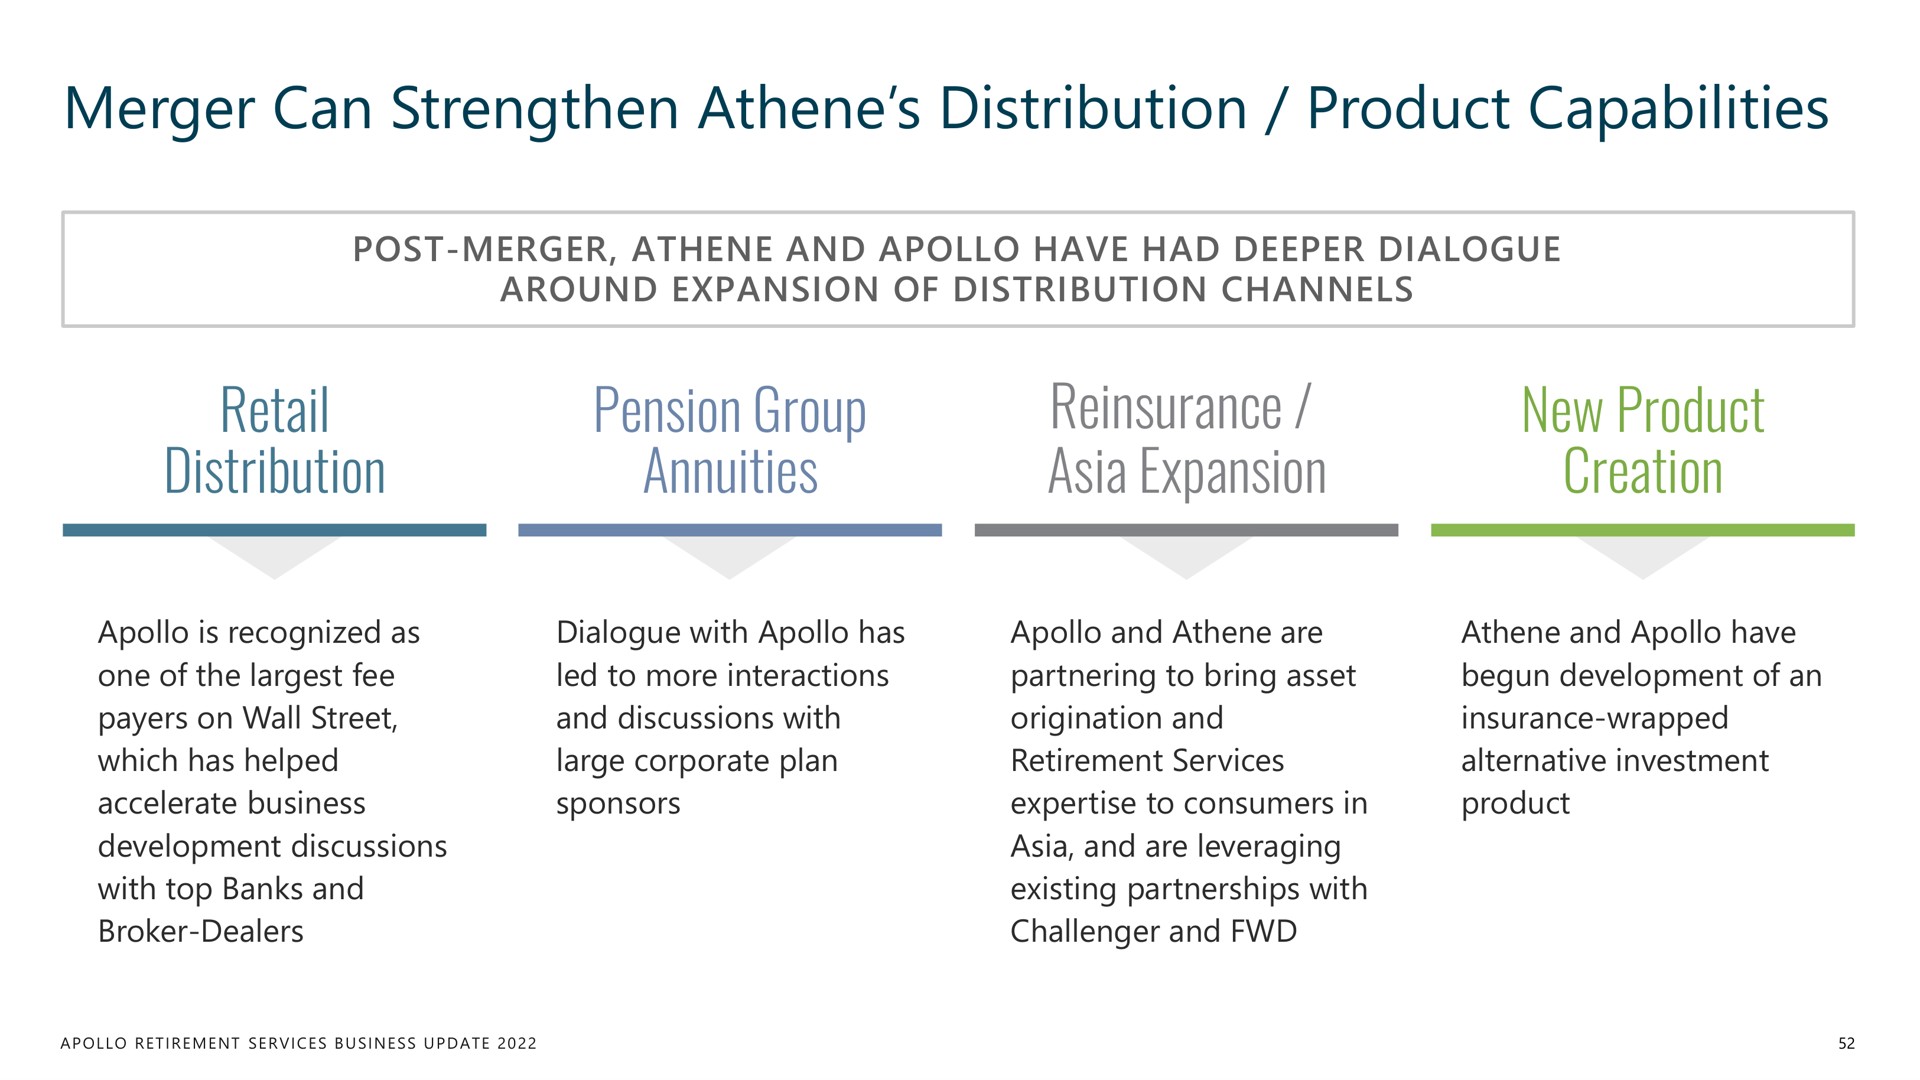 merger can strengthen distribution product capabilities retail distribution pension group annuities reinsurance expansion new product creation | Apollo Global Management